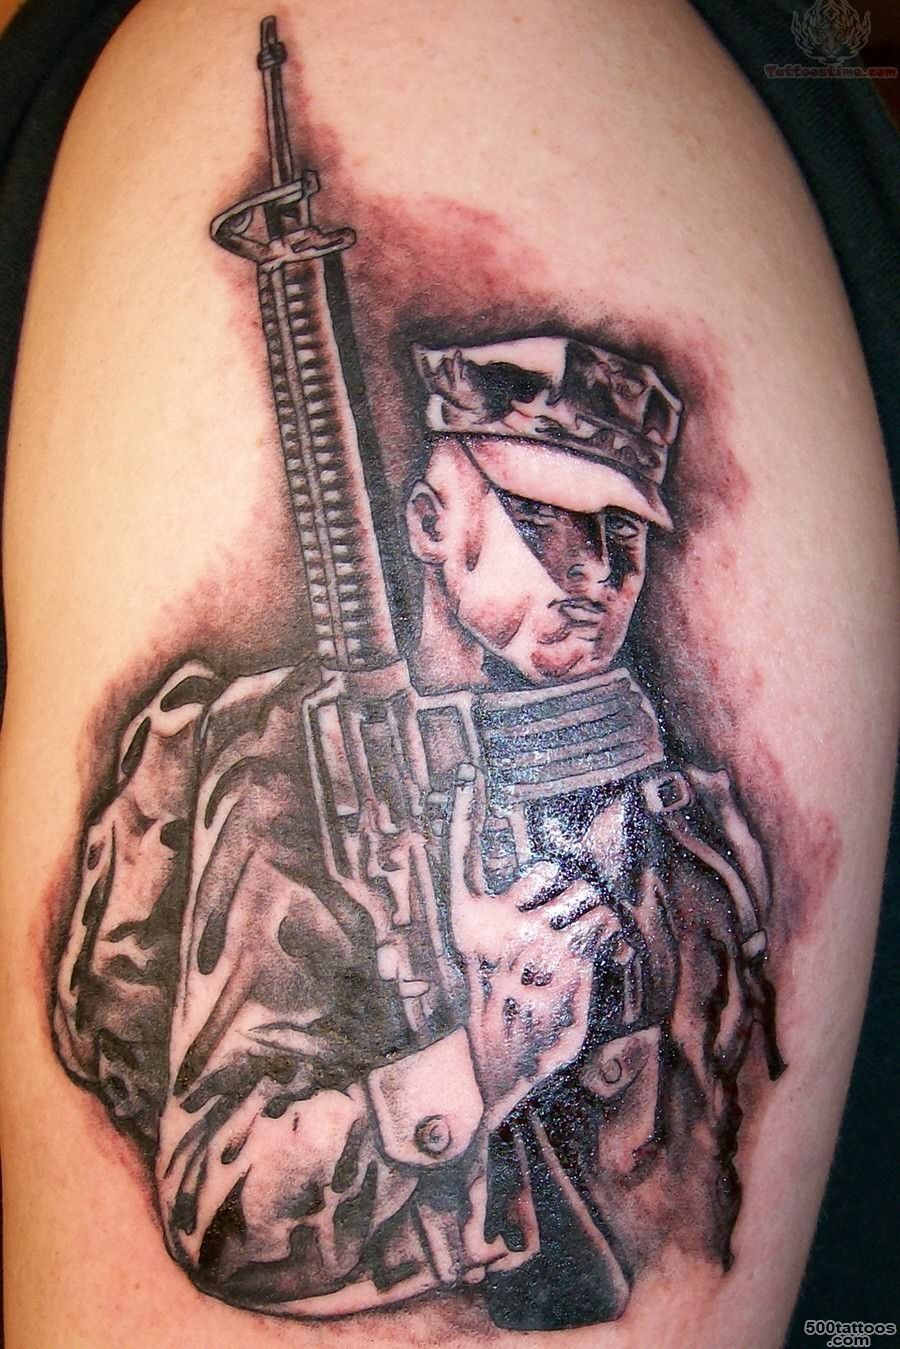 Pin Military Tattoos Page 9 on Pinterest_11